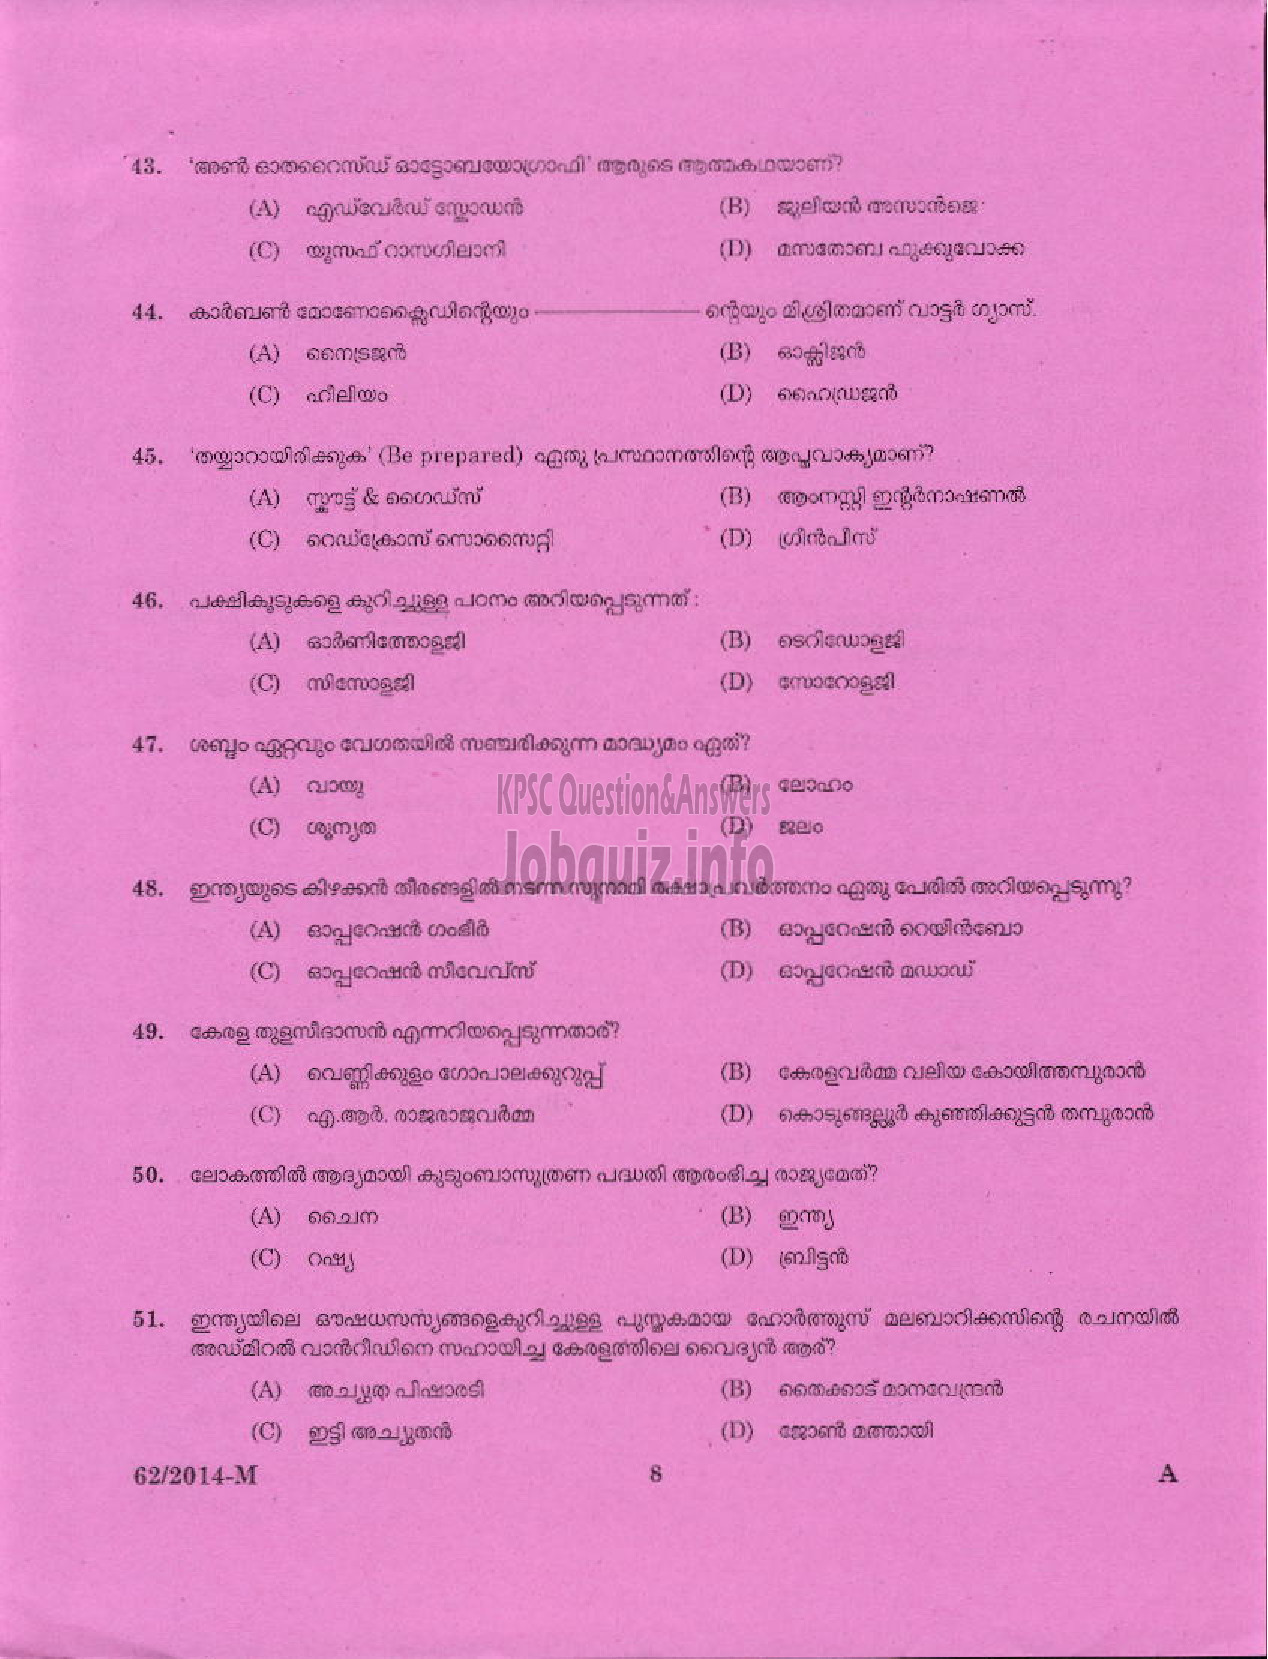 Kerala PSC Question Paper - ATTENDER PLATE CLEANING SURVEY AND LAND RECORDS TVPM ( Malayalam ) -6